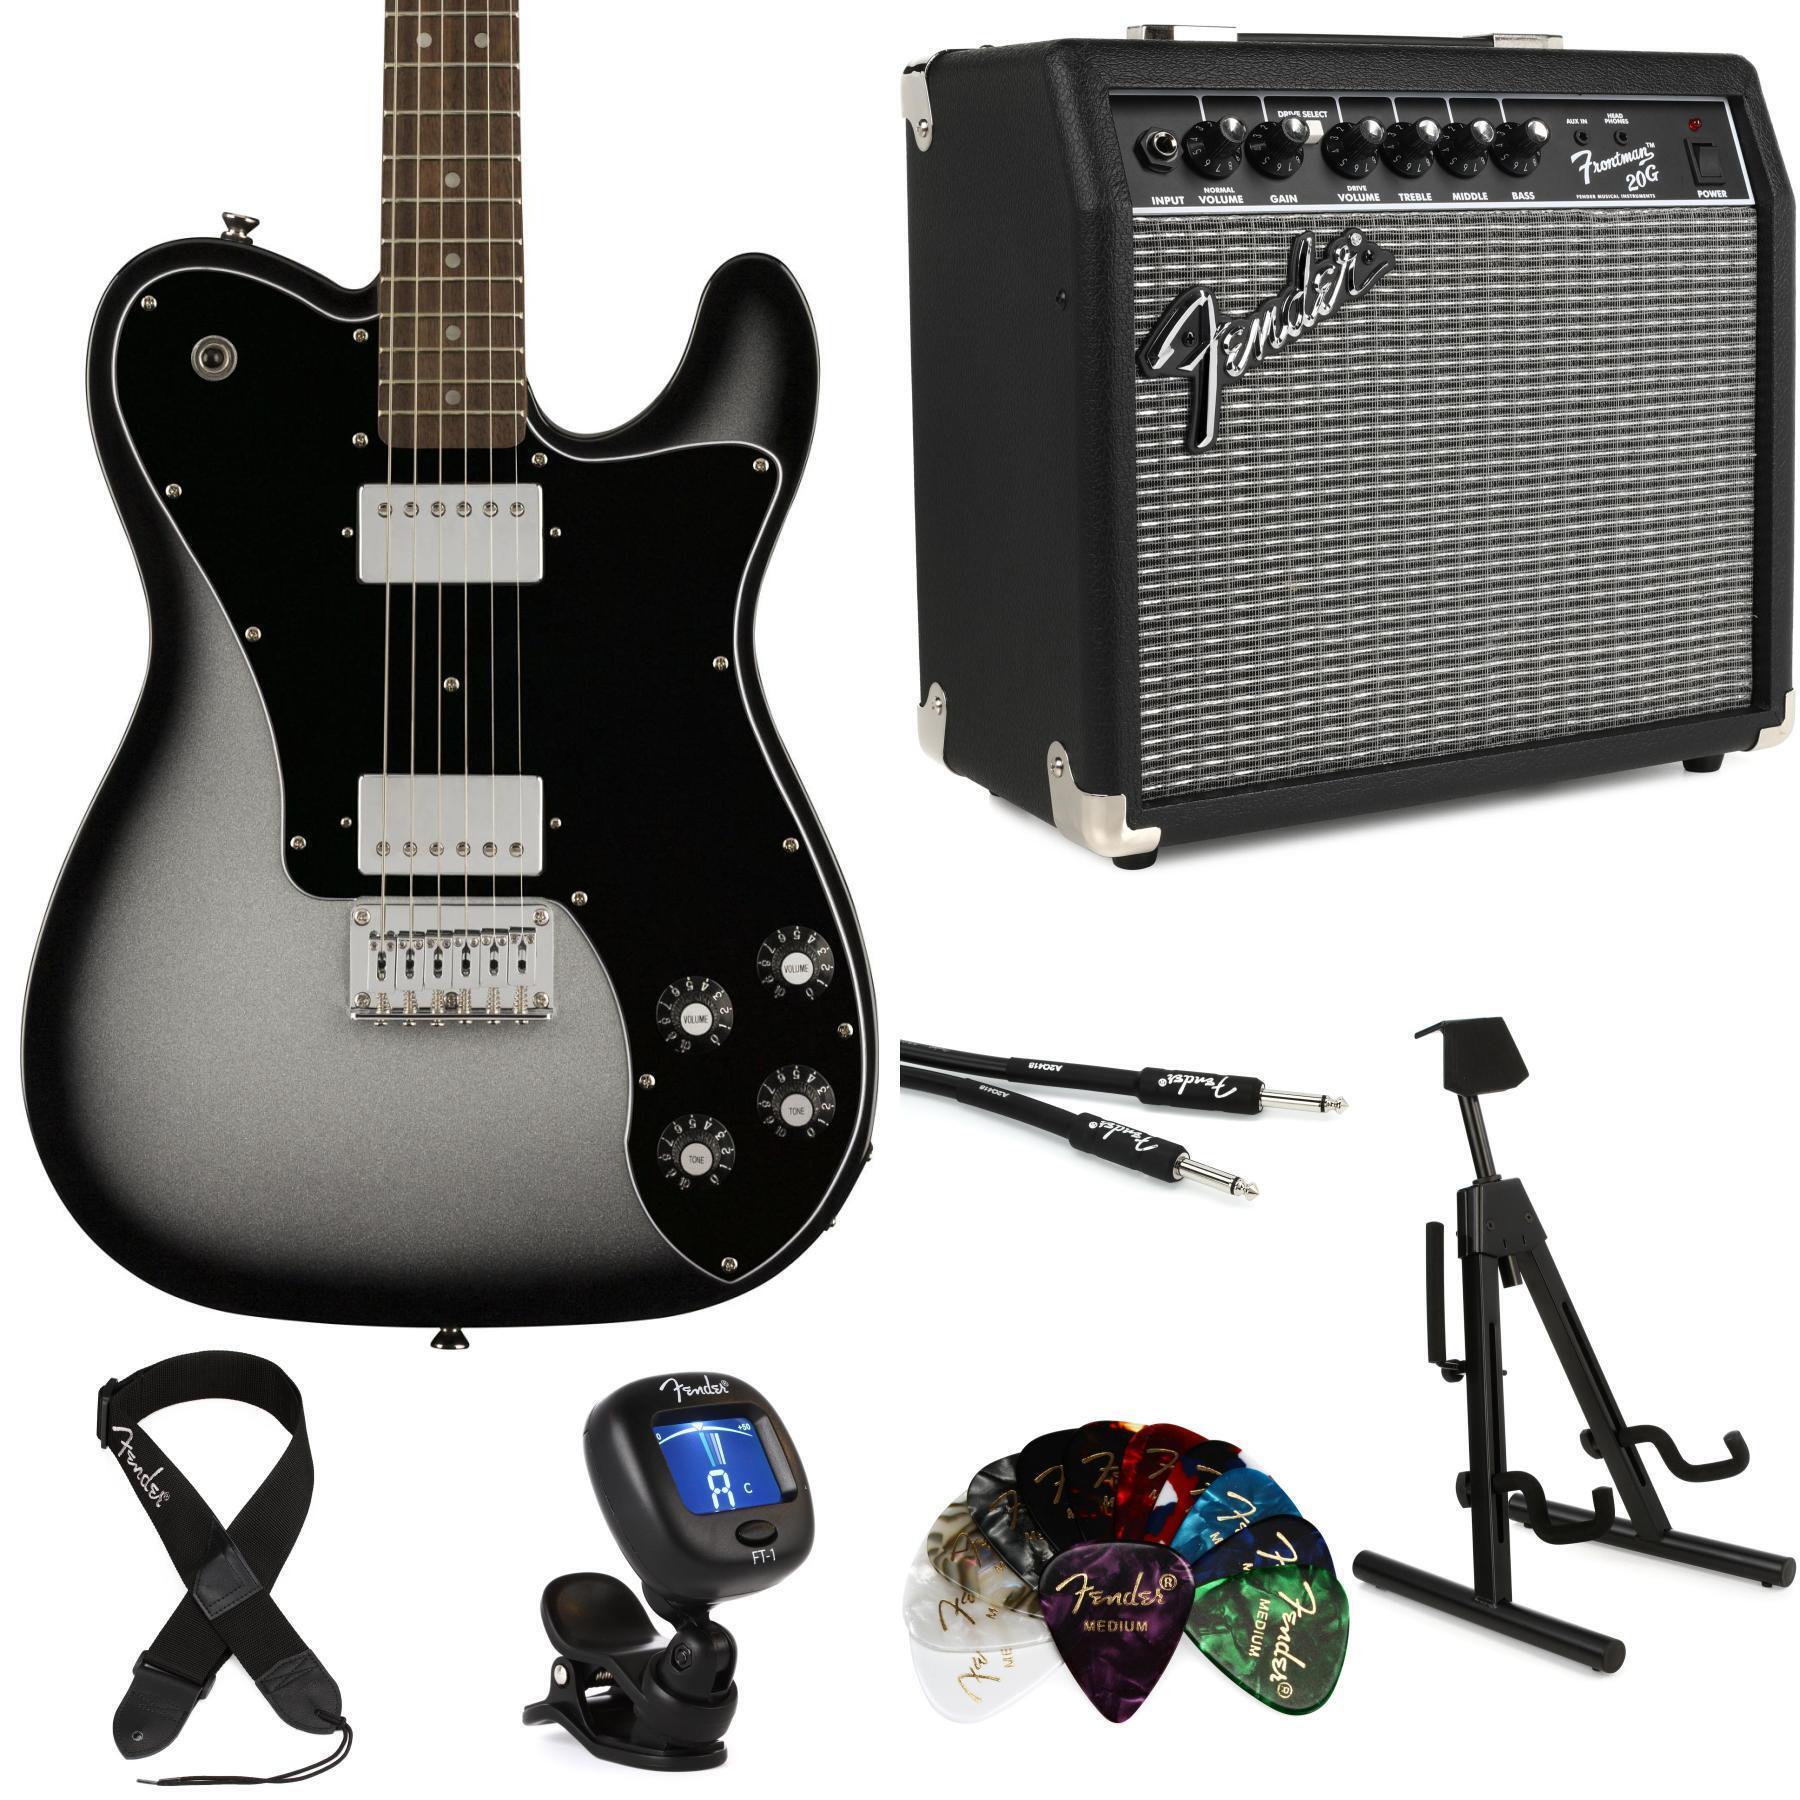 Squier Affinity Series Telecaster Deluxe Electric Guitar and Frontman 20G  Combo Amp Bundle - Silver Burst, Sweetwater Exclusive